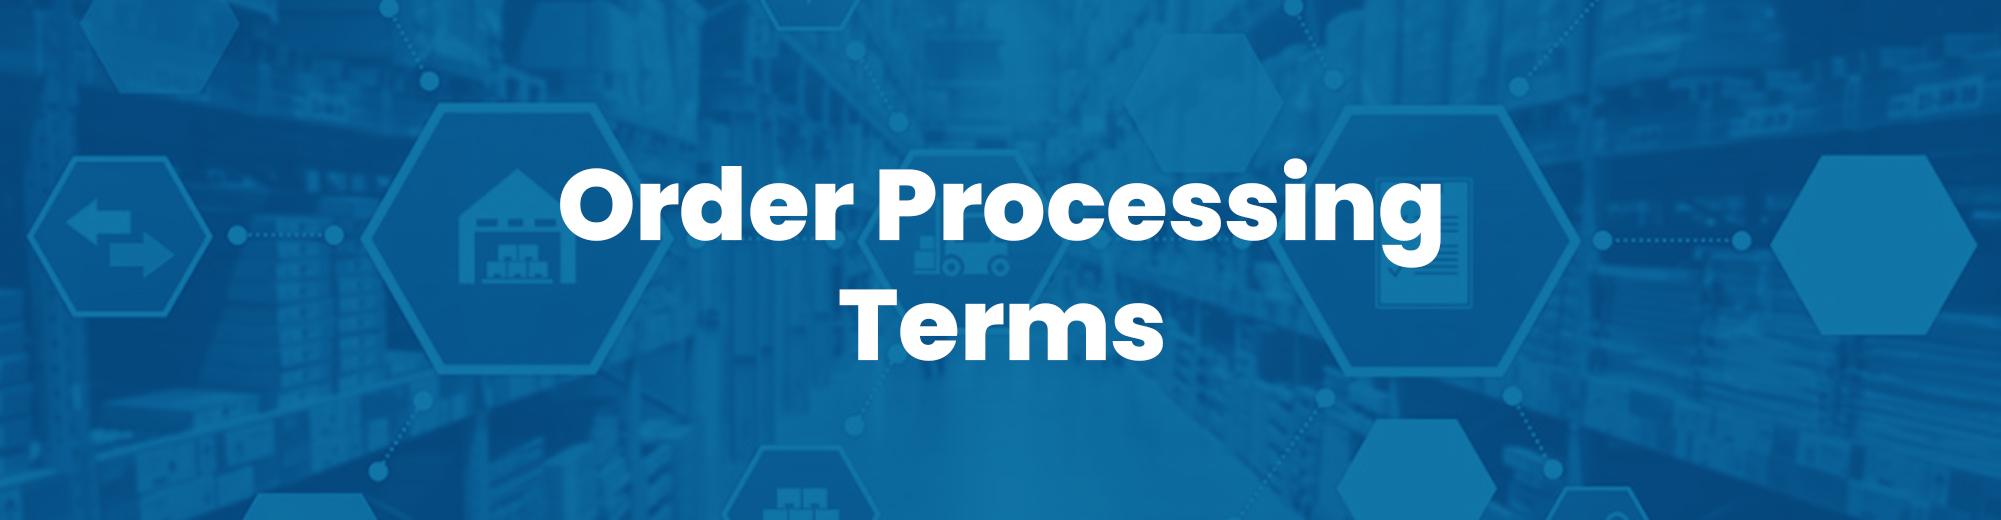 Order Processing Terms